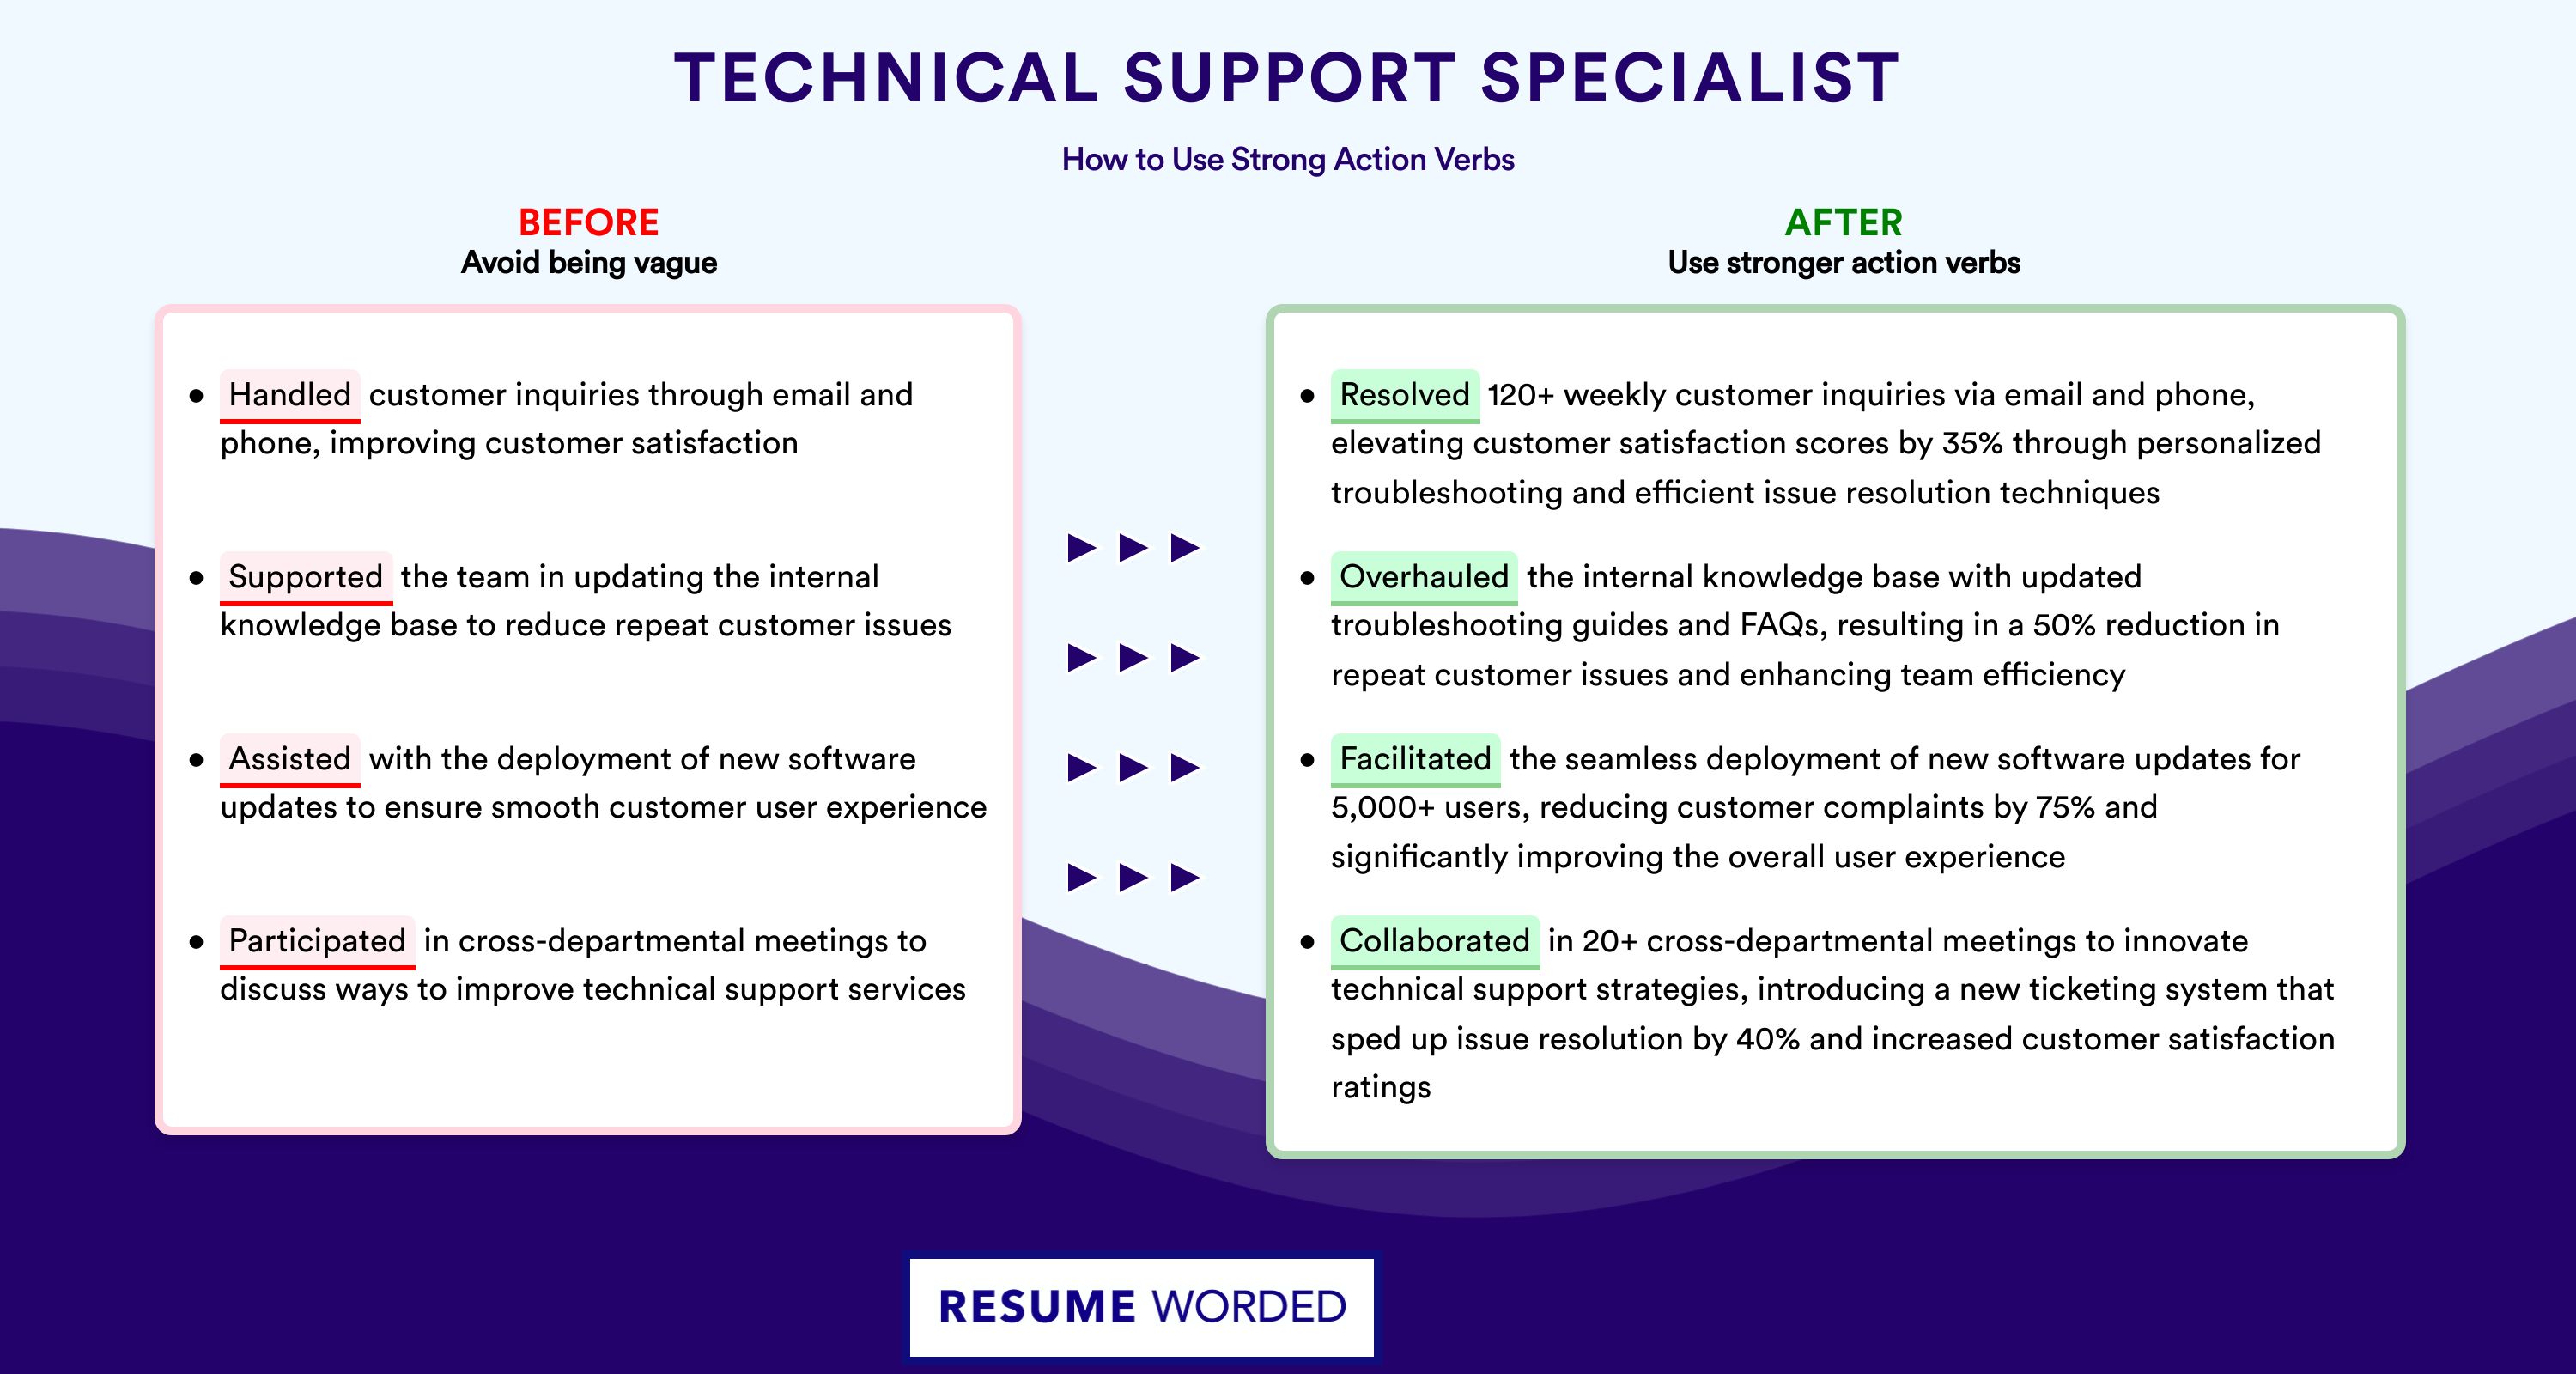 Action Verbs for Technical Support Specialist